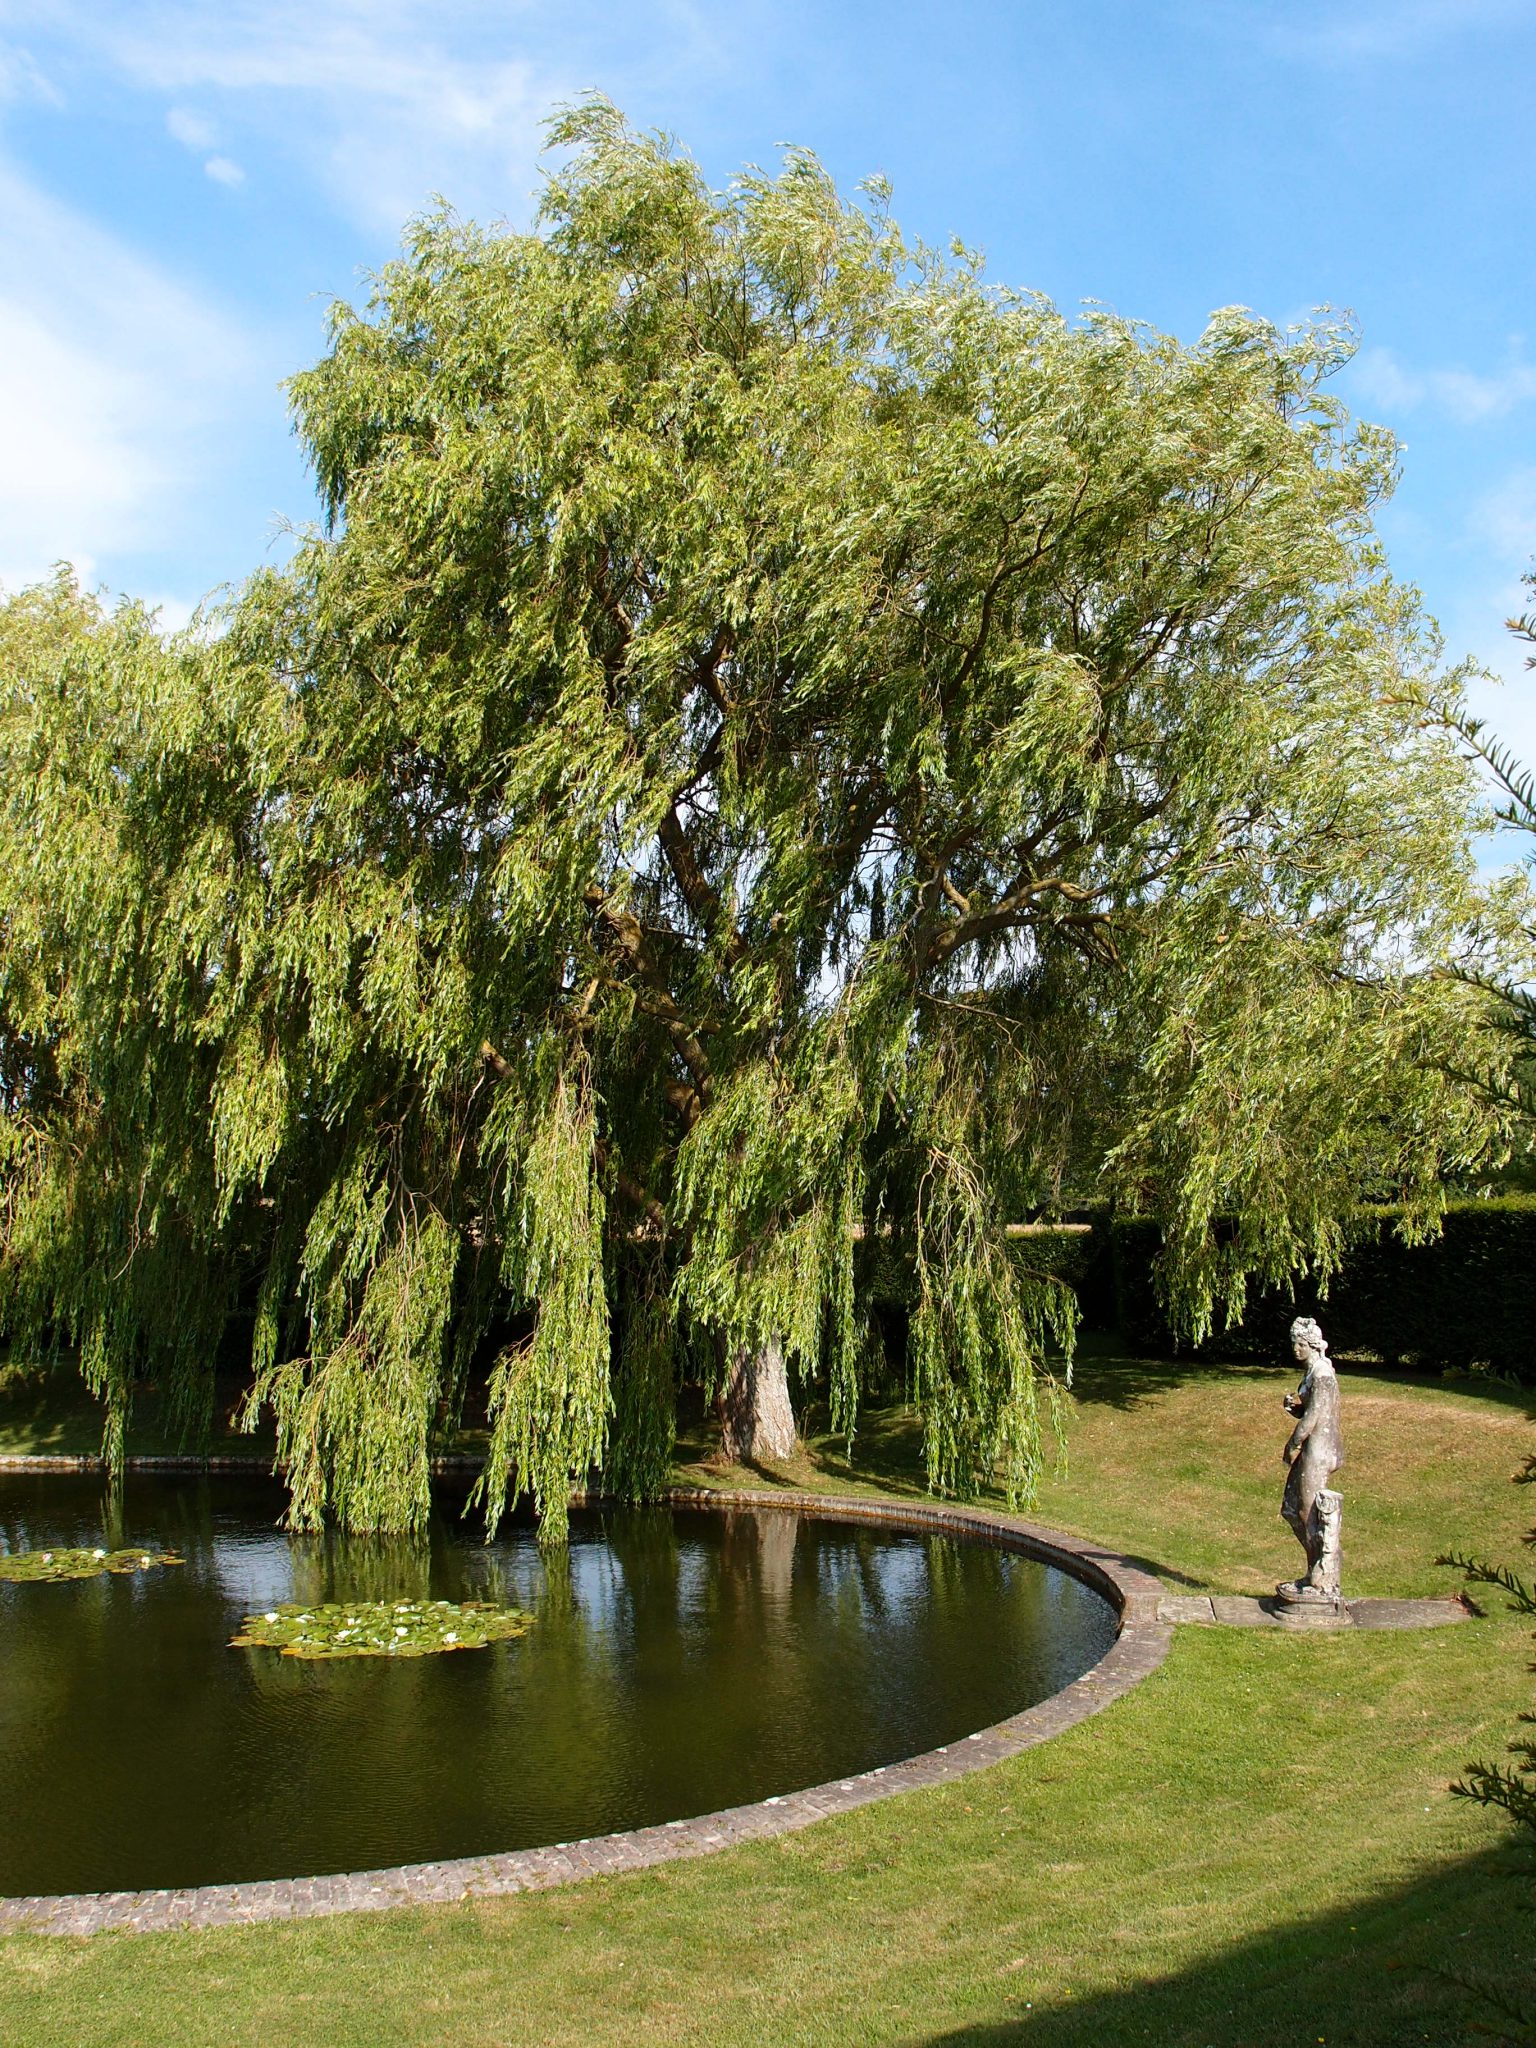 A classical statue stands at the southern-most curve of the Lily Pond